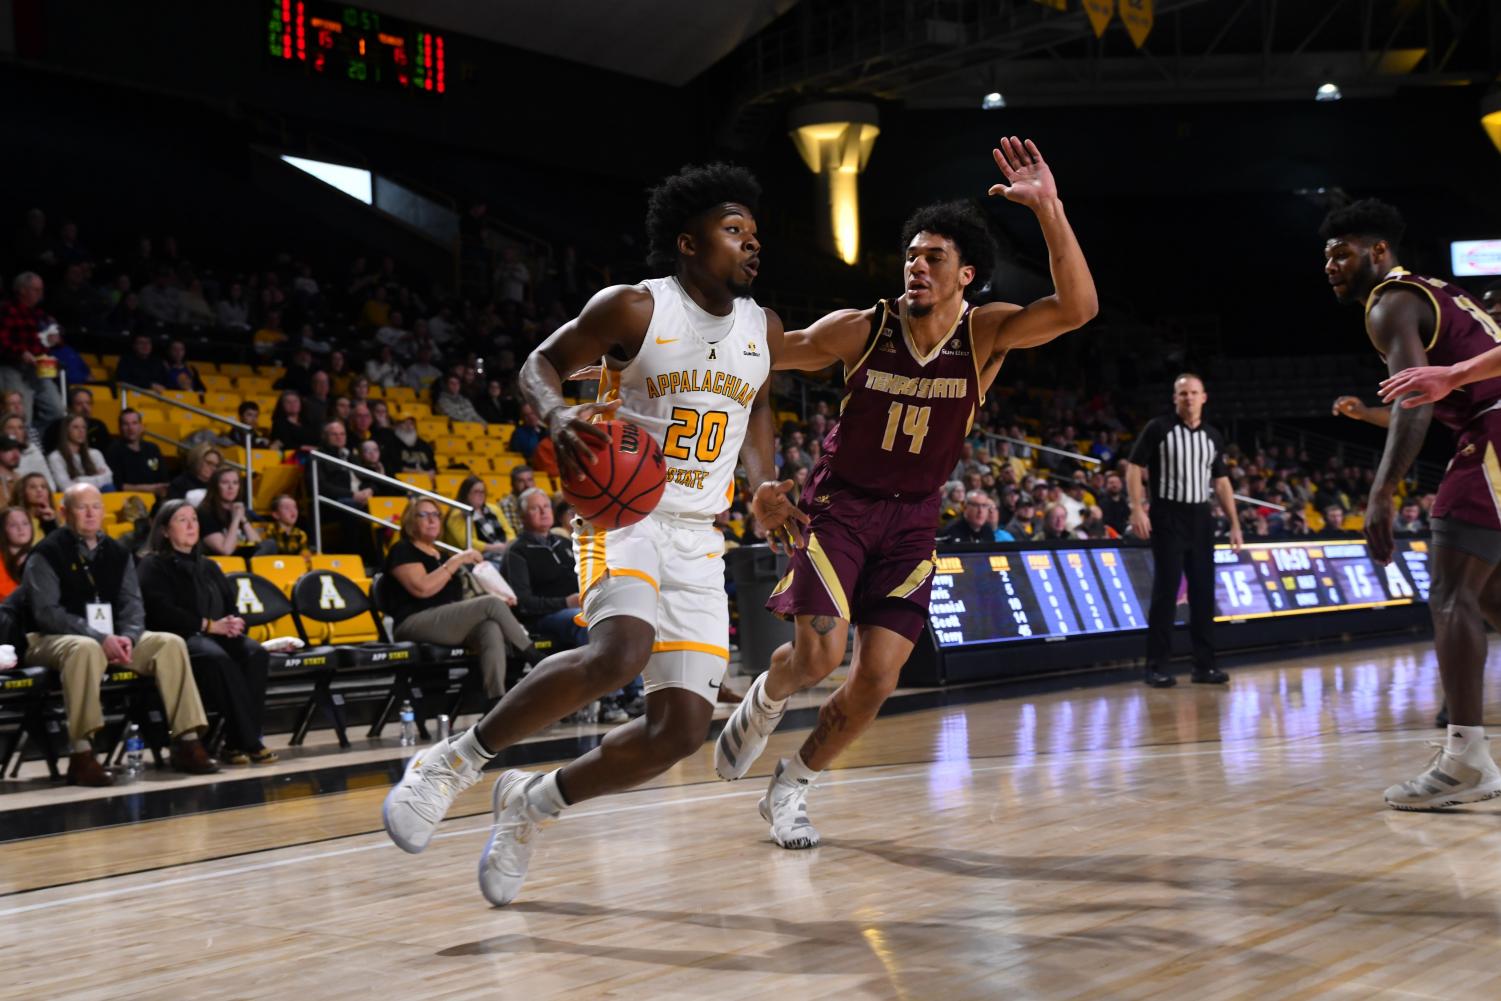 Men’s basketball completes season sweep of Southern with 6257